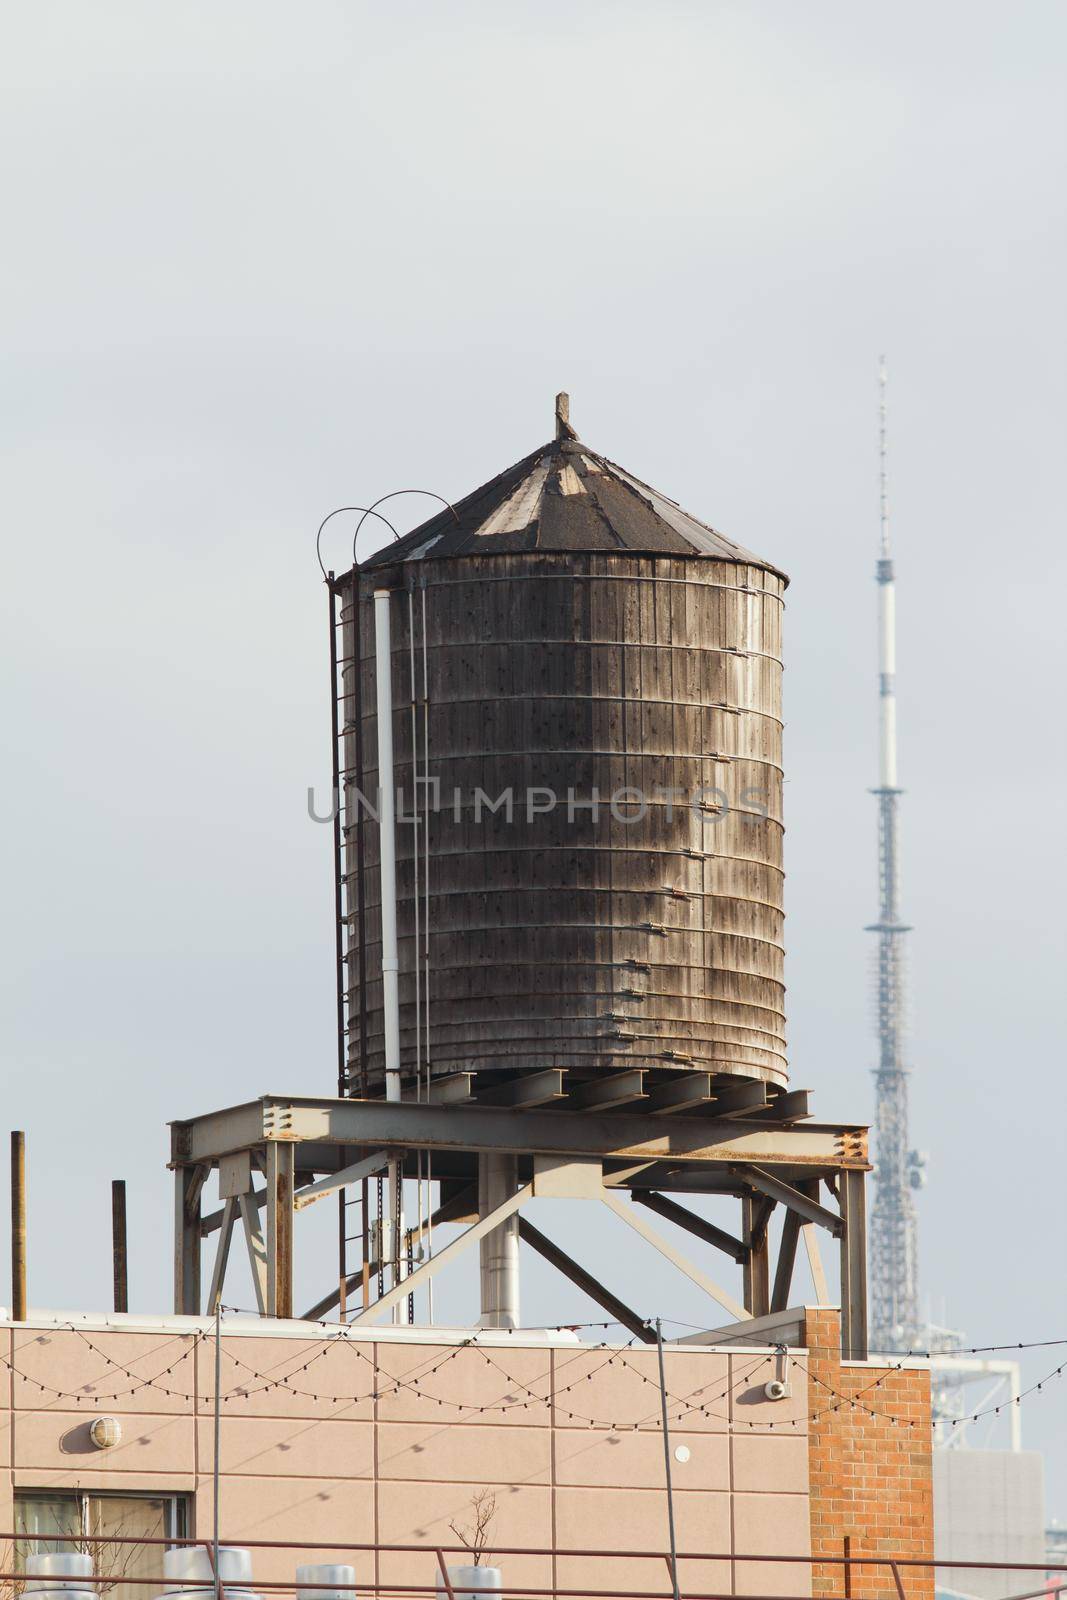 Fire barrel with water on the roof, New York, telephoto shot